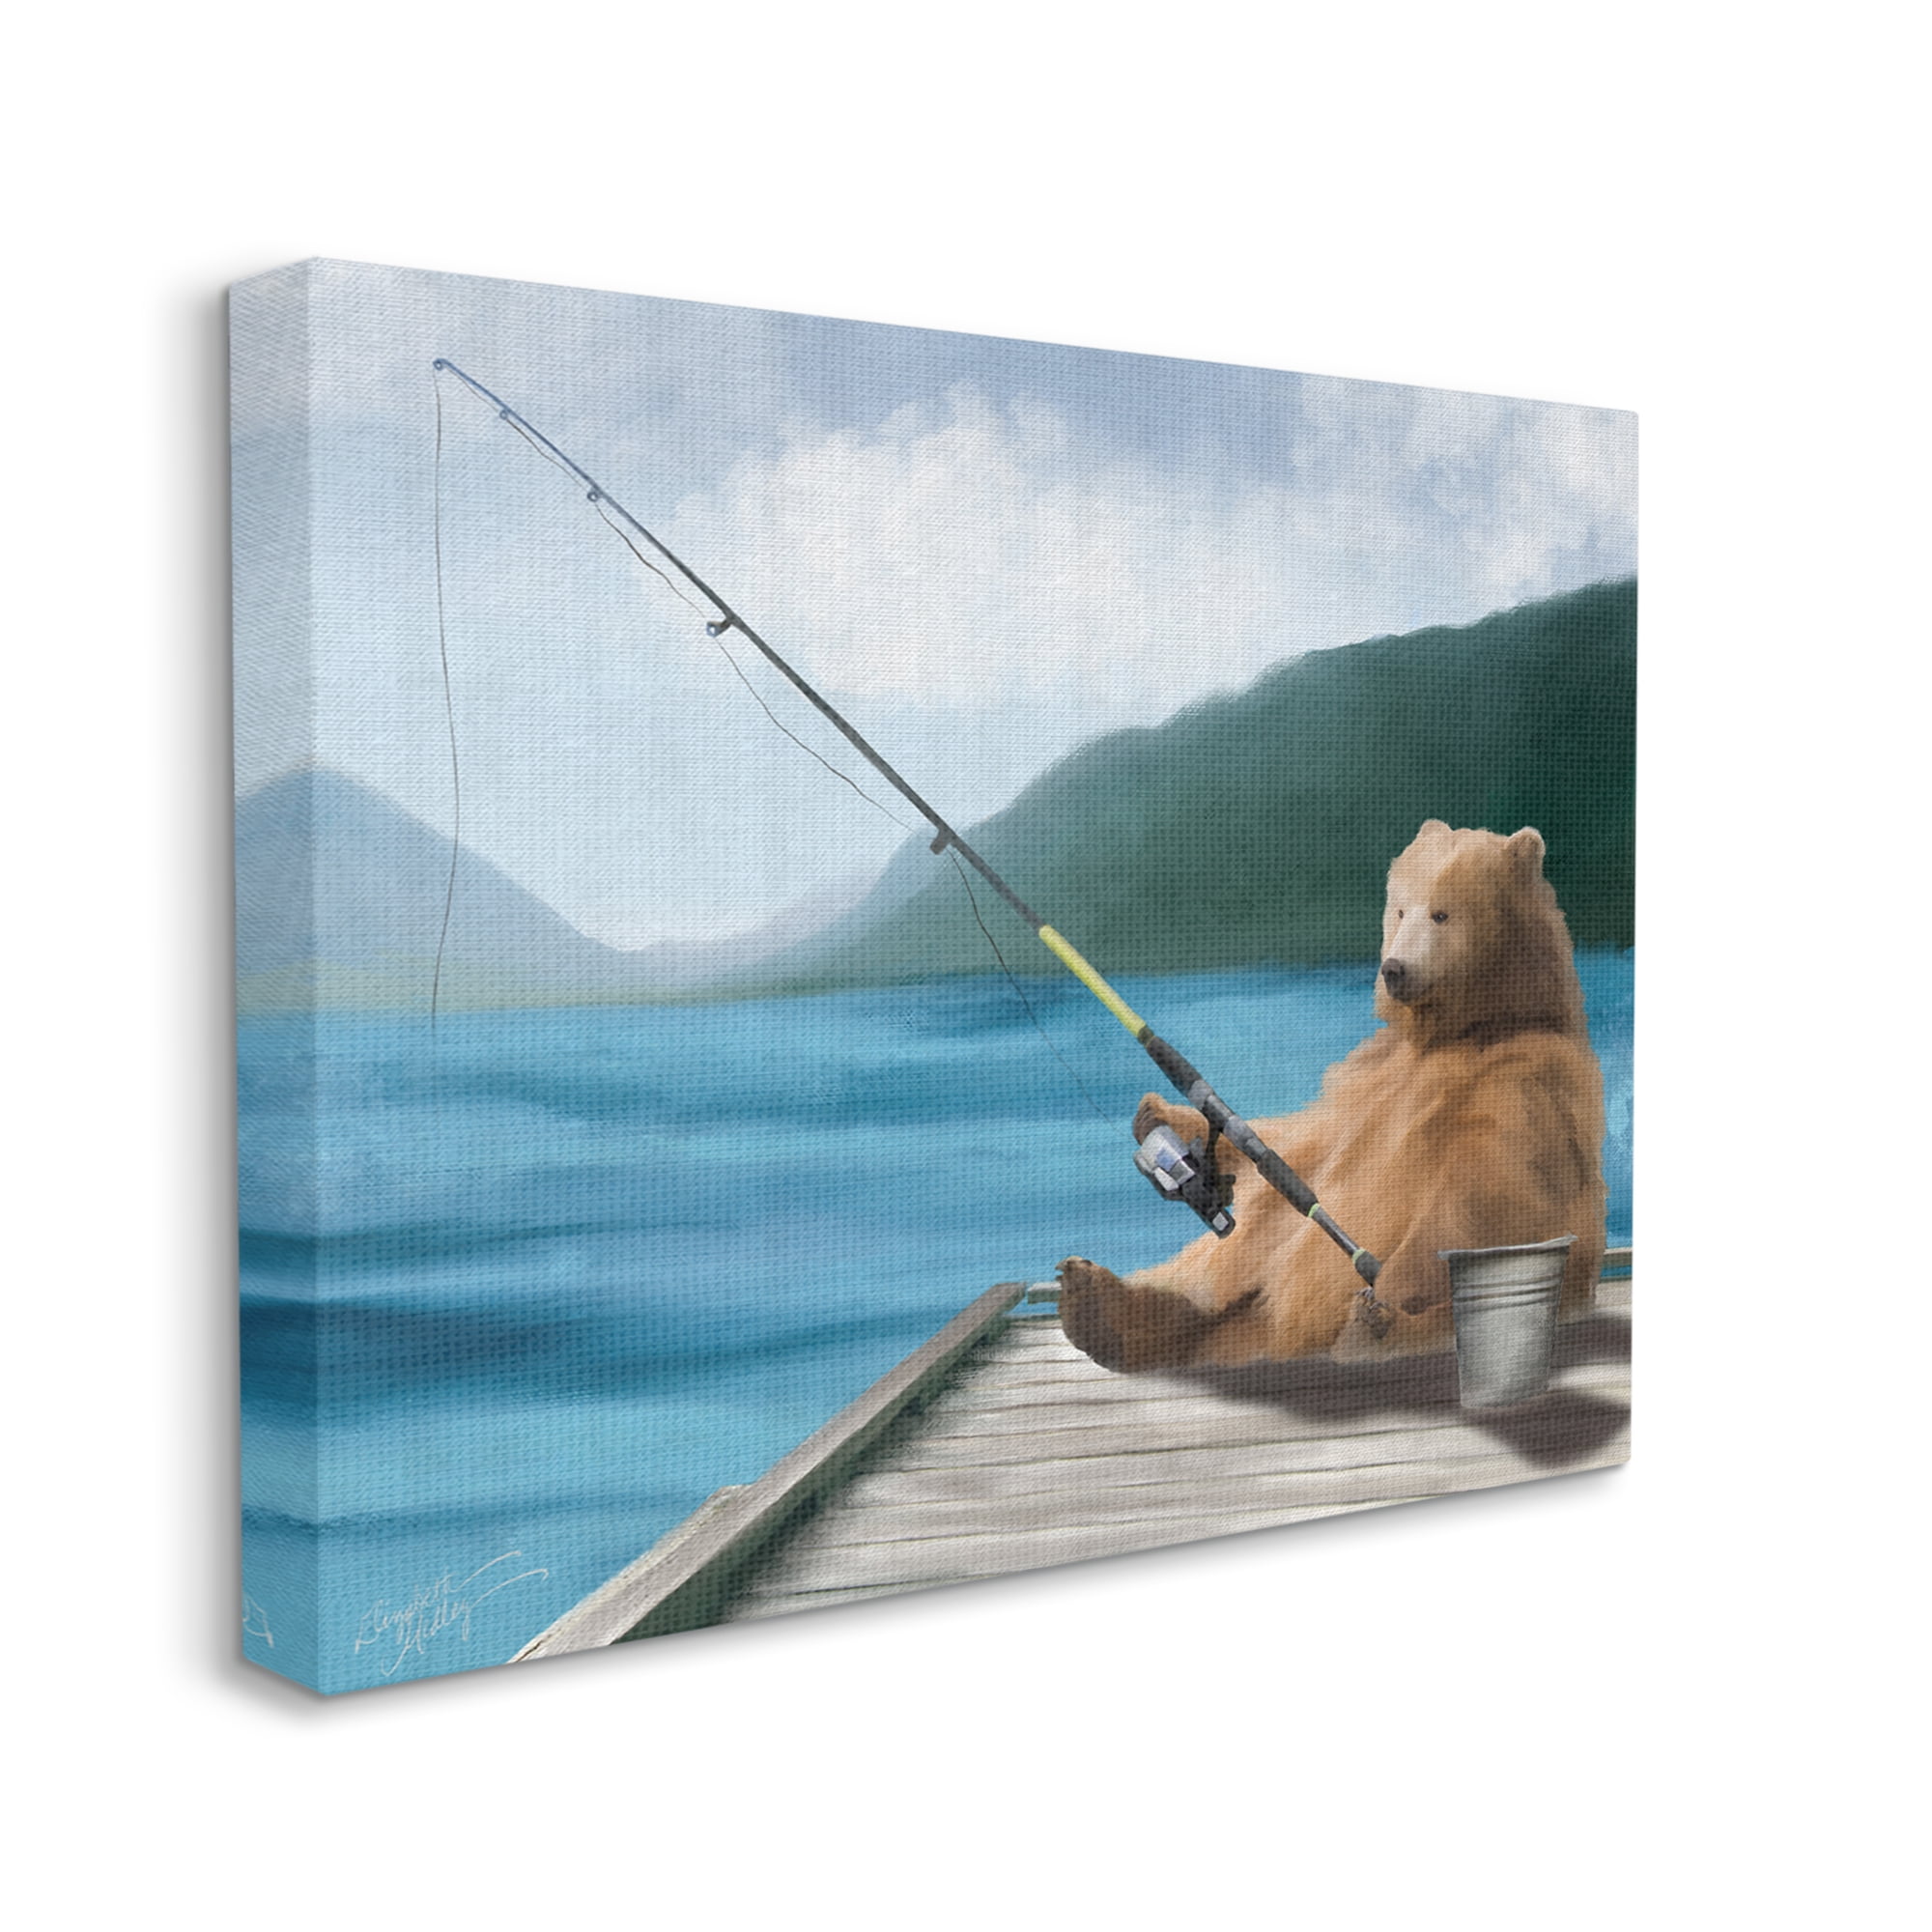 Stupell Bear Fishing Pole Lake Dock Animals & Insects Painting Gallery Wrapped Canvas Print Wall Art, Size: 20 x 16